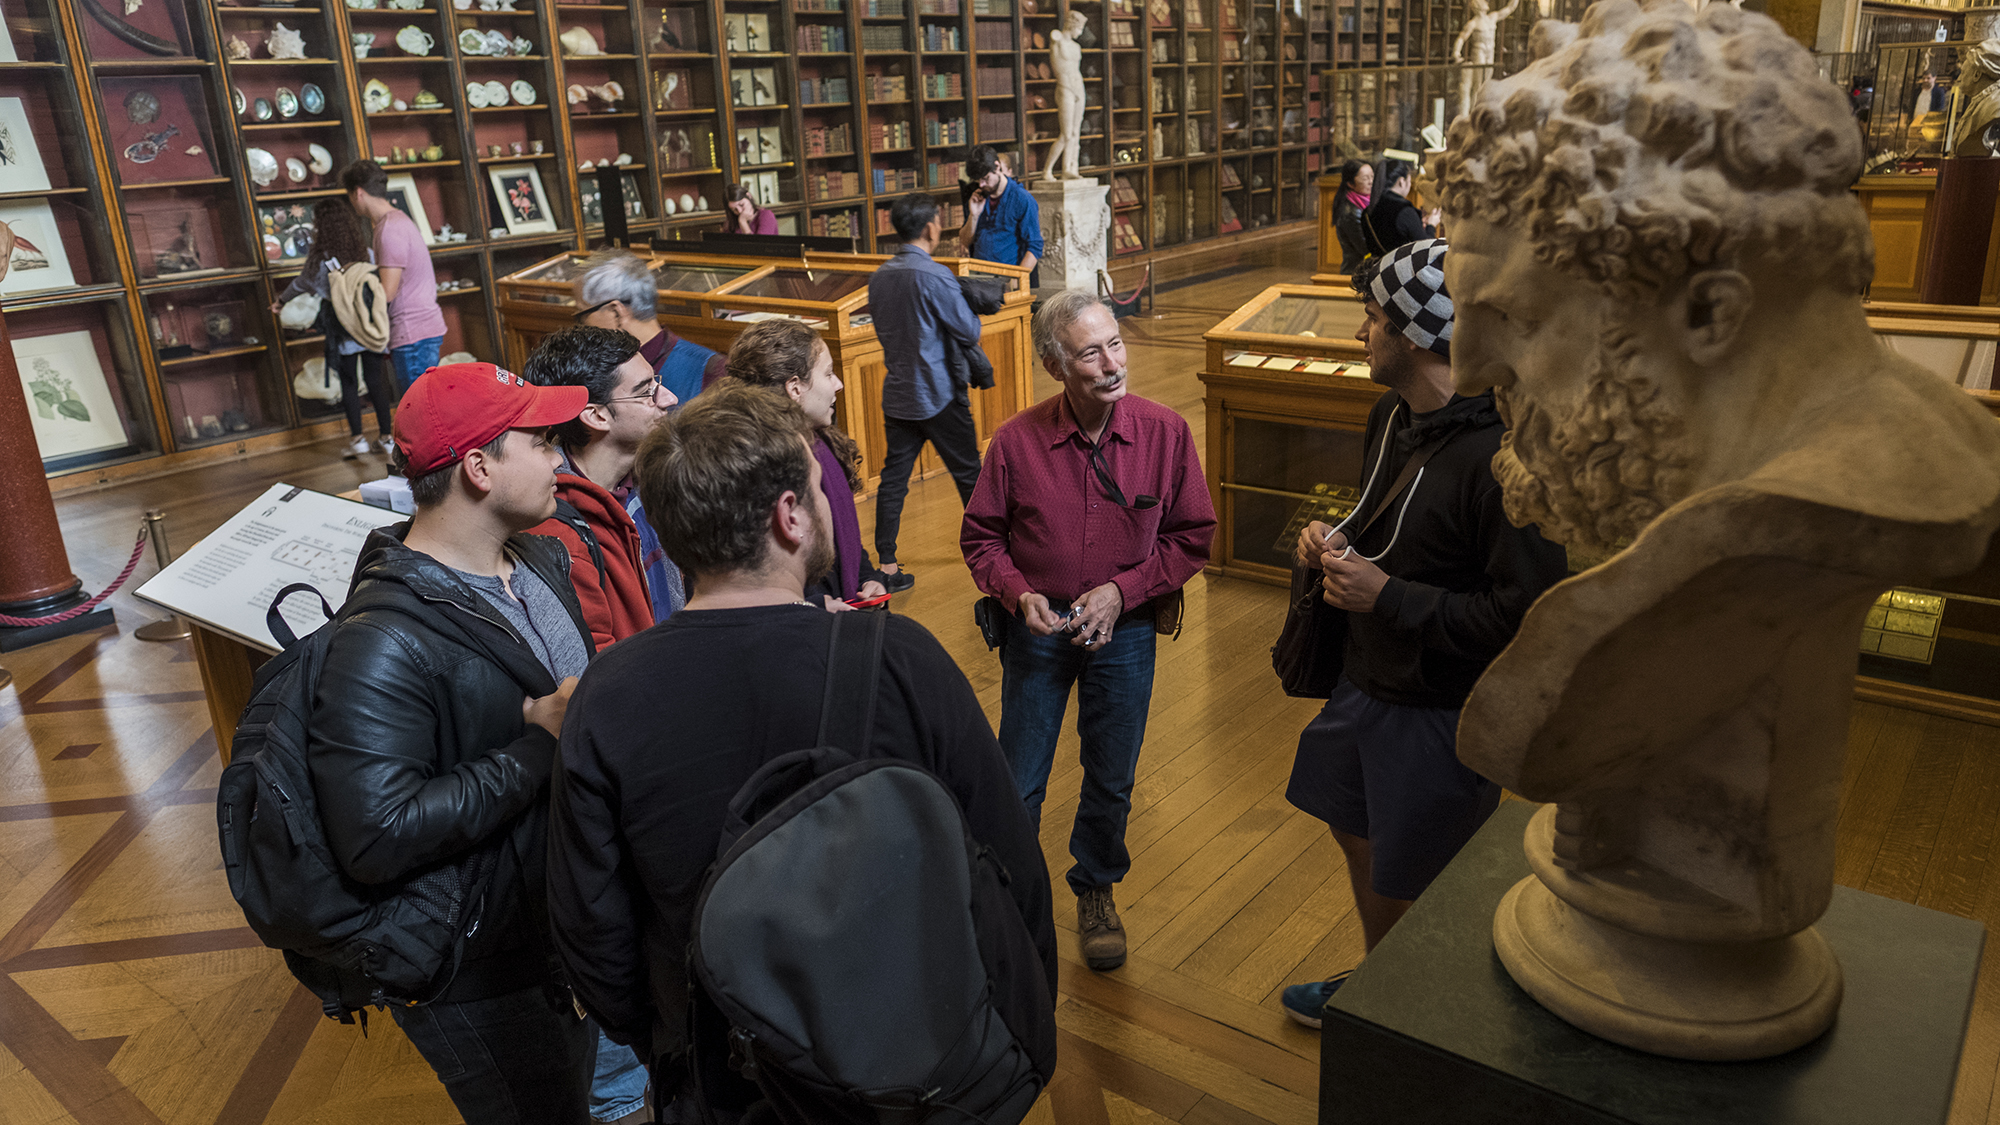 John Whittaker, professor of anthropology, took students to the British Museum while teaching in London during the fall of 2017.